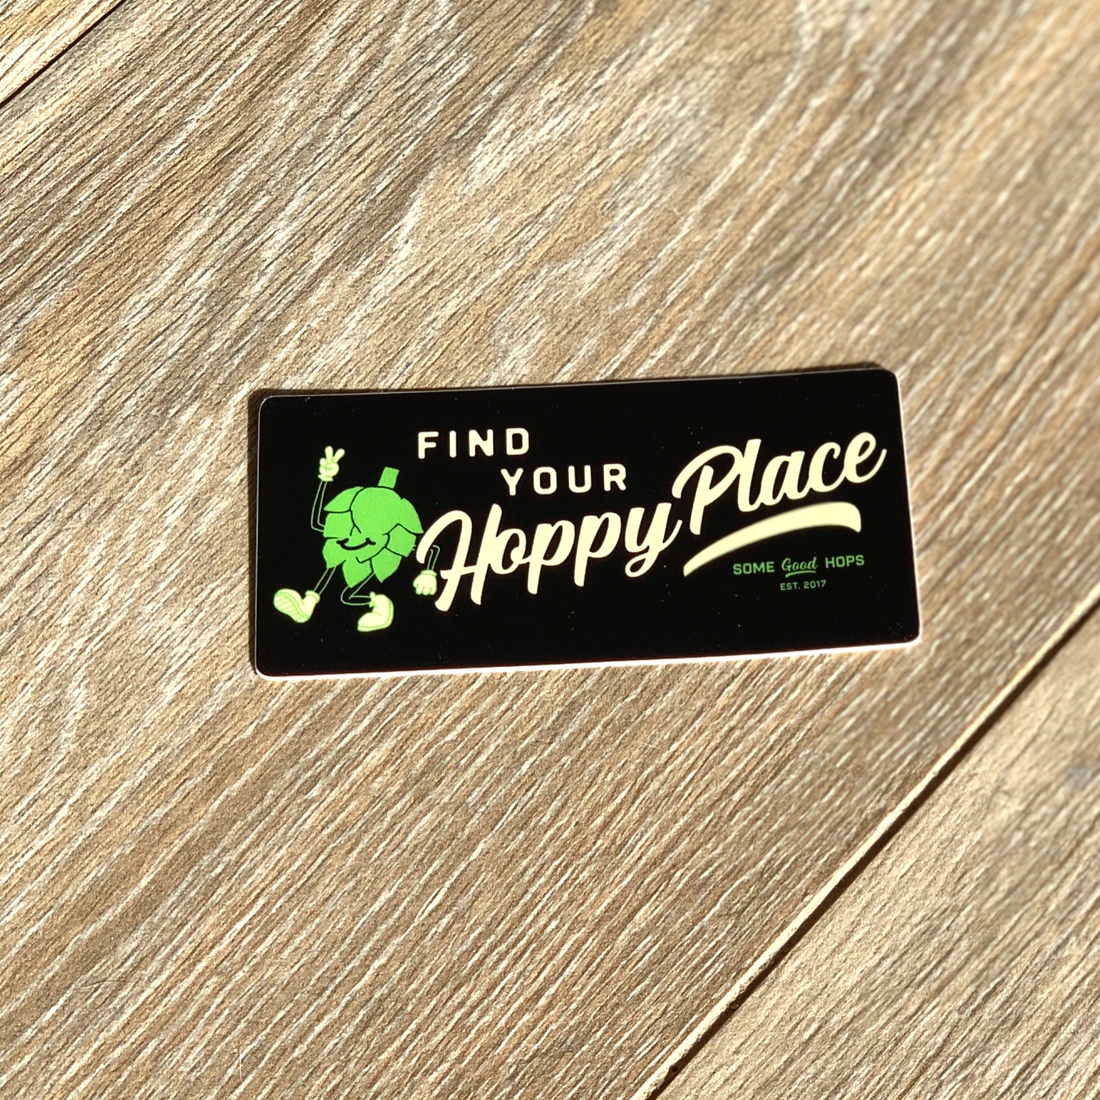 Some Good Hops Find Your Hoppy Place 3.0 Sticker